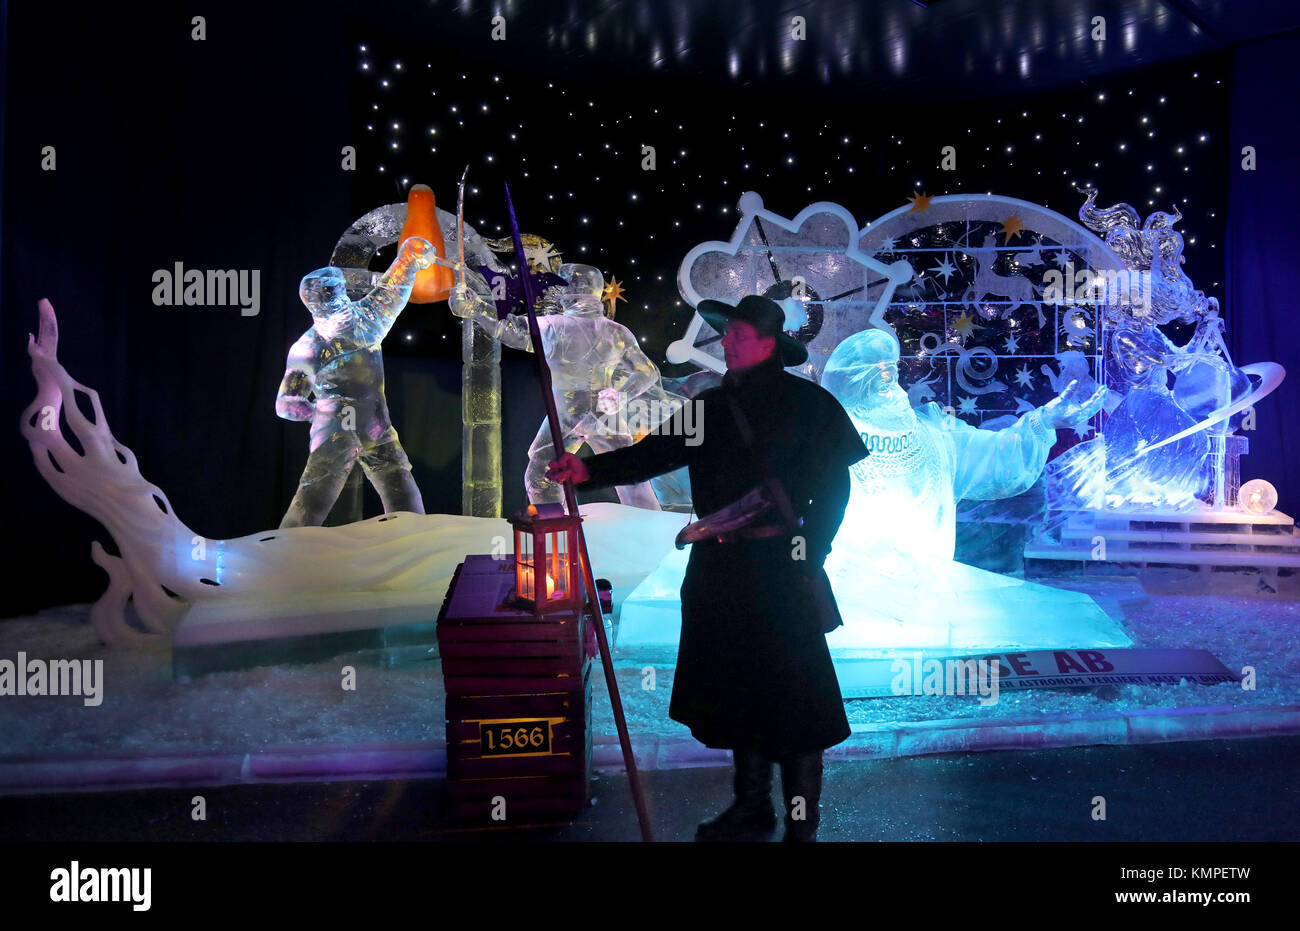 The new Eiswelt (lit. ice world) entitled 'Die geheimnisvolle Stadt - 800 Jahre Rostock' (lit. The mysterious city - 800 years of Rostock) is presented during a press event at Karls Erlebnis-Dorf, in Roevershagen, Germany, 8 December 2017. 22 artists from 10 countries have modelled 18 stages of Rostock's history in ice to mark the city's anniversary. Photo: Bernd Wüstneck/dpa Stock Photo